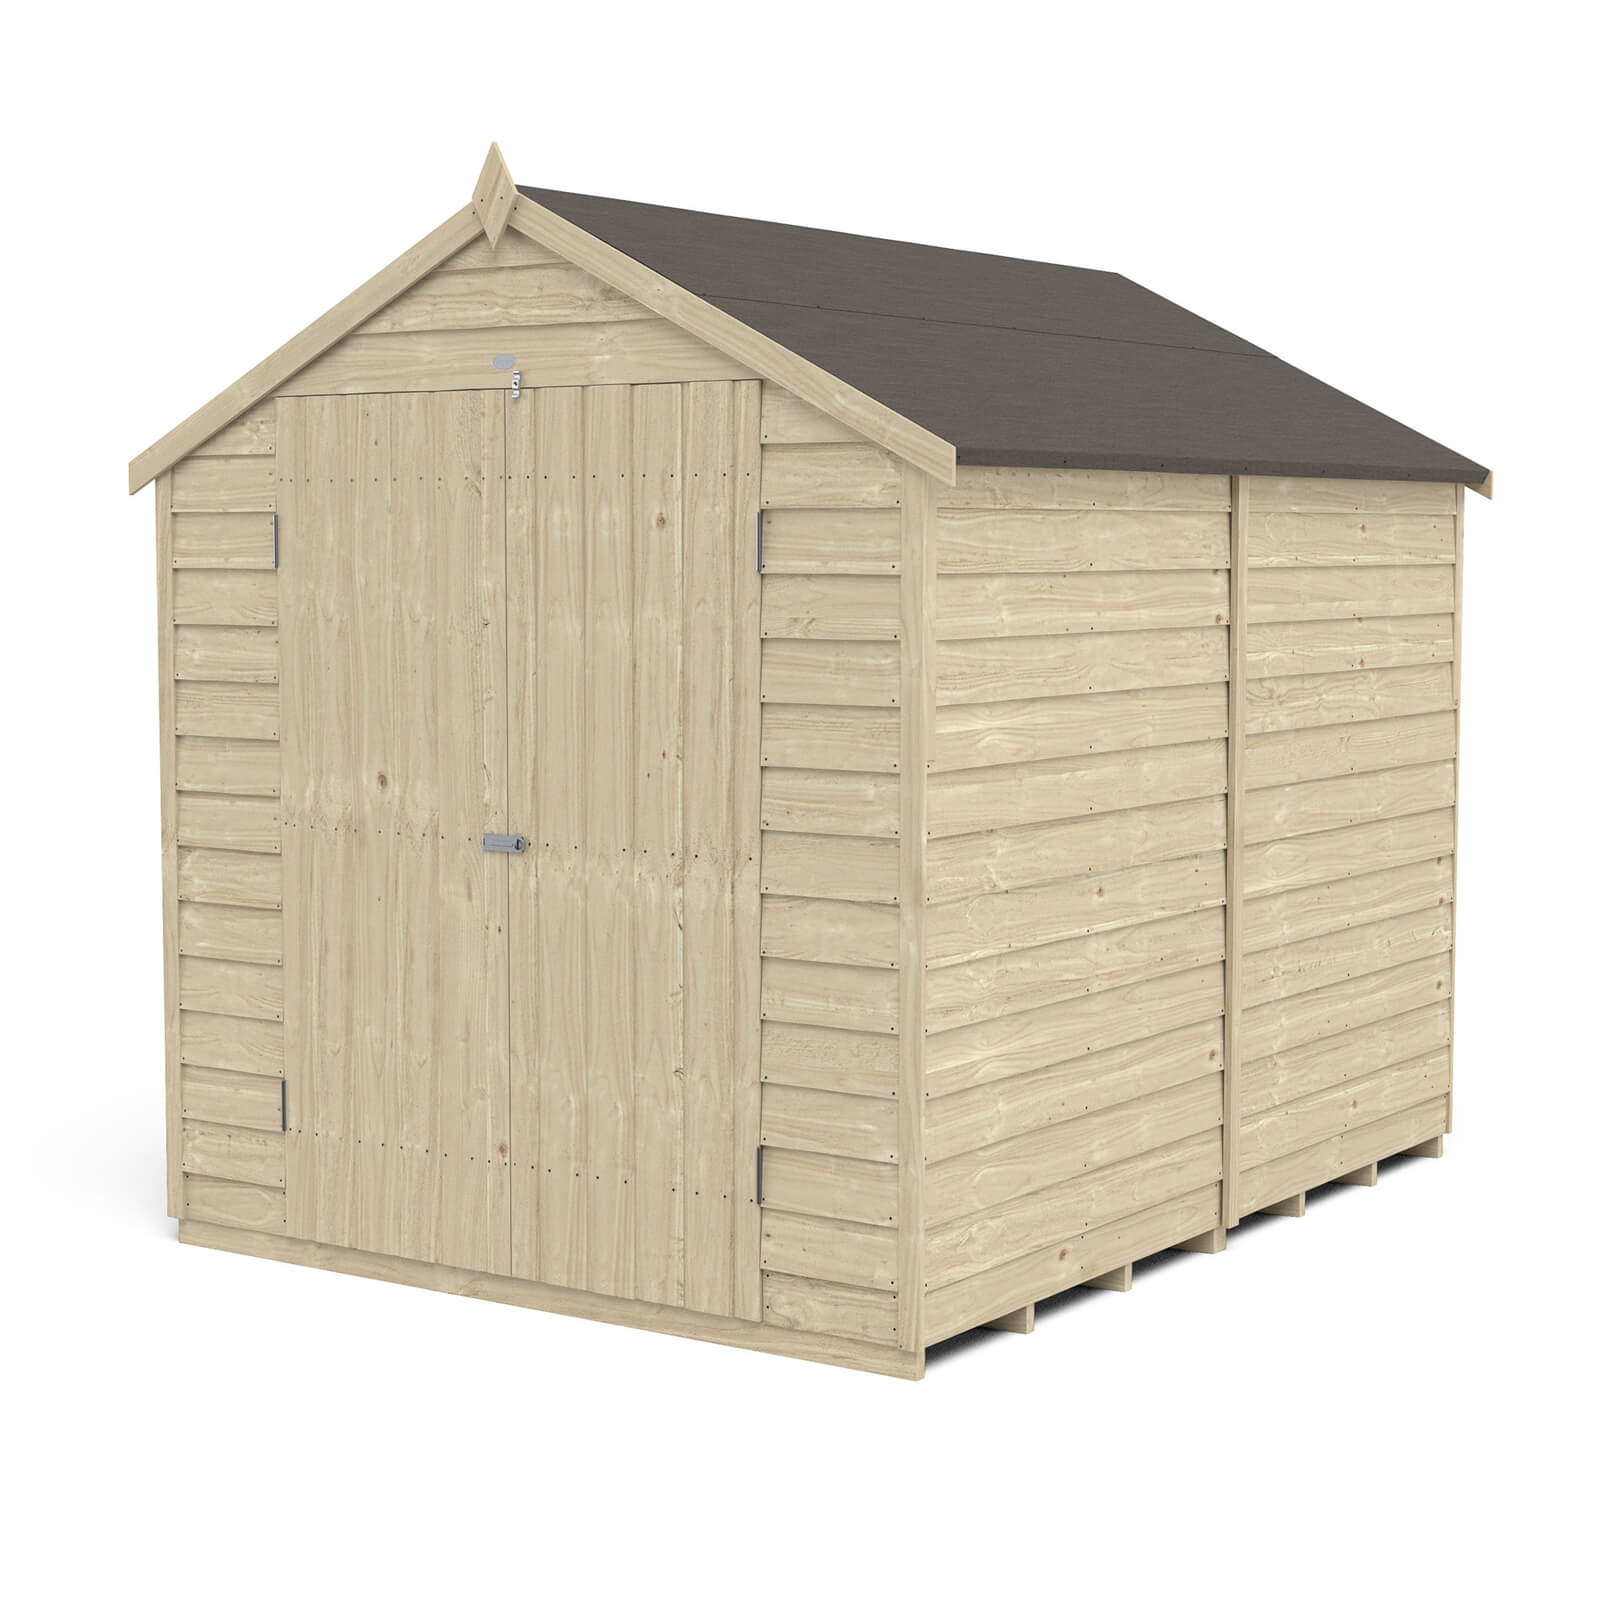 Forest 8 x 6ft Overlap Pressure Treated Apex Shed - Double Door No Windows - incl. Installation